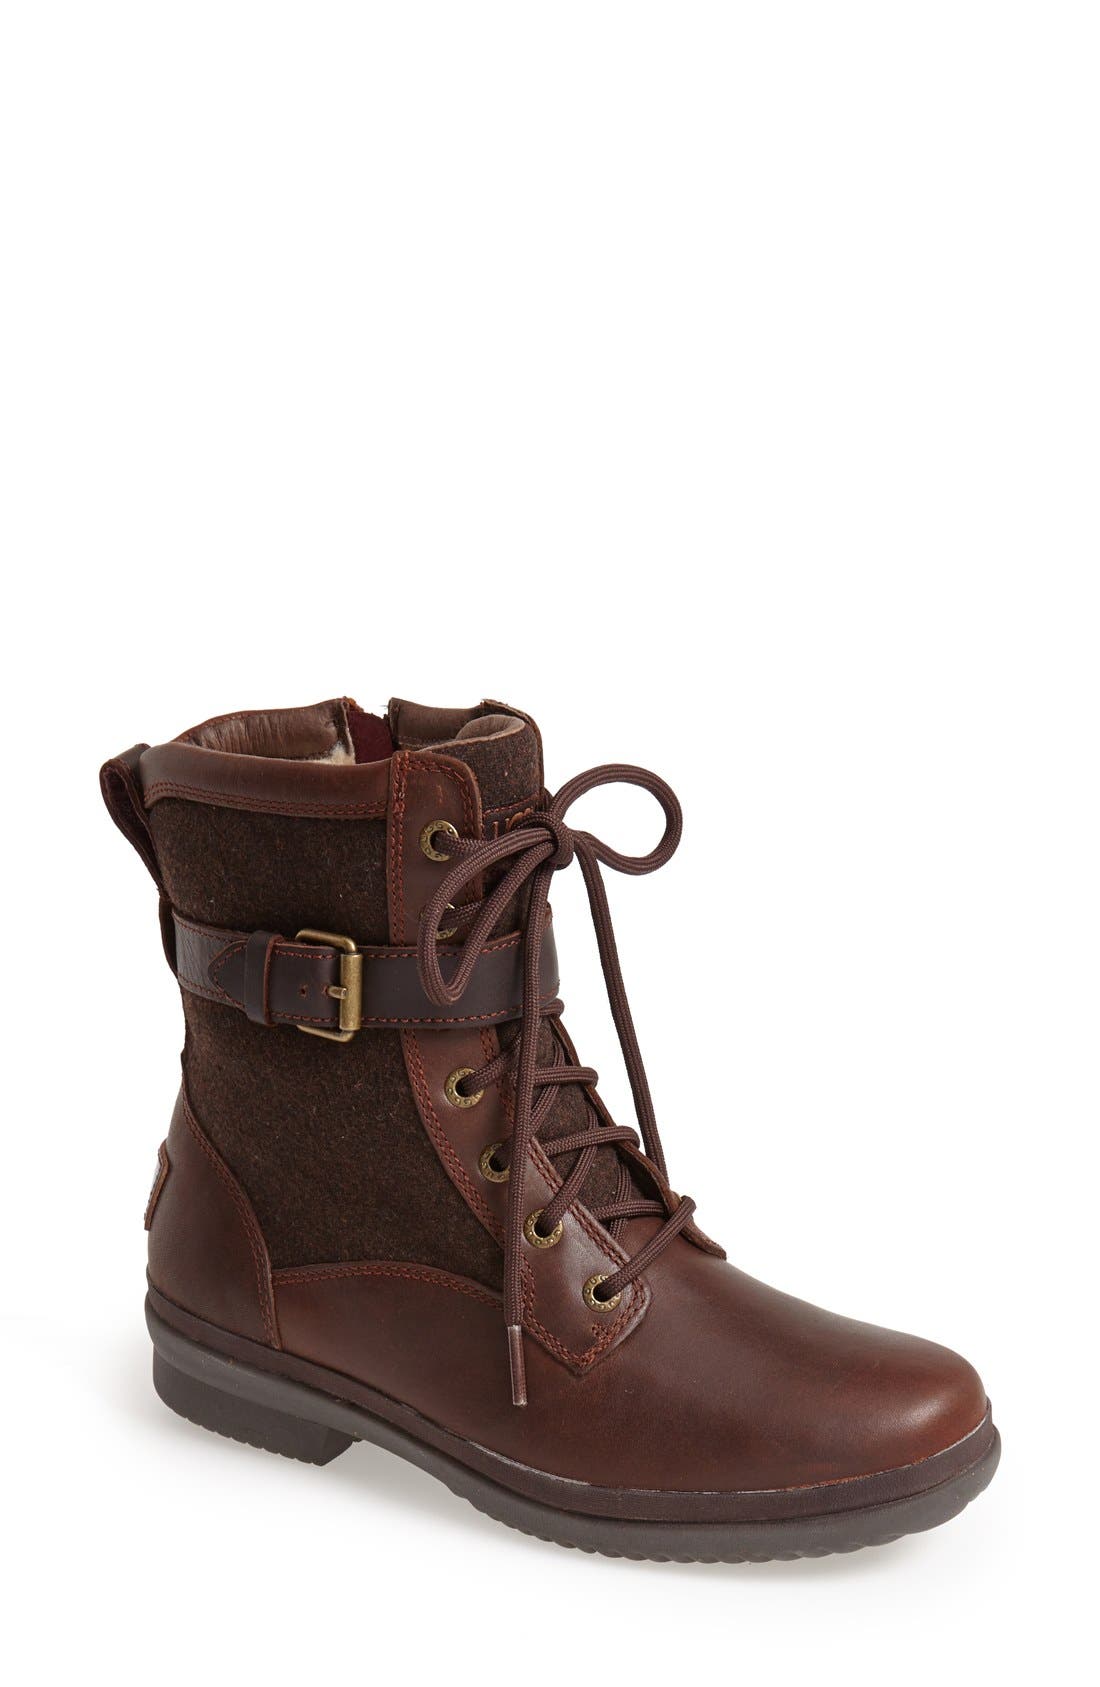 ugg snow boots womens nordstrom rack